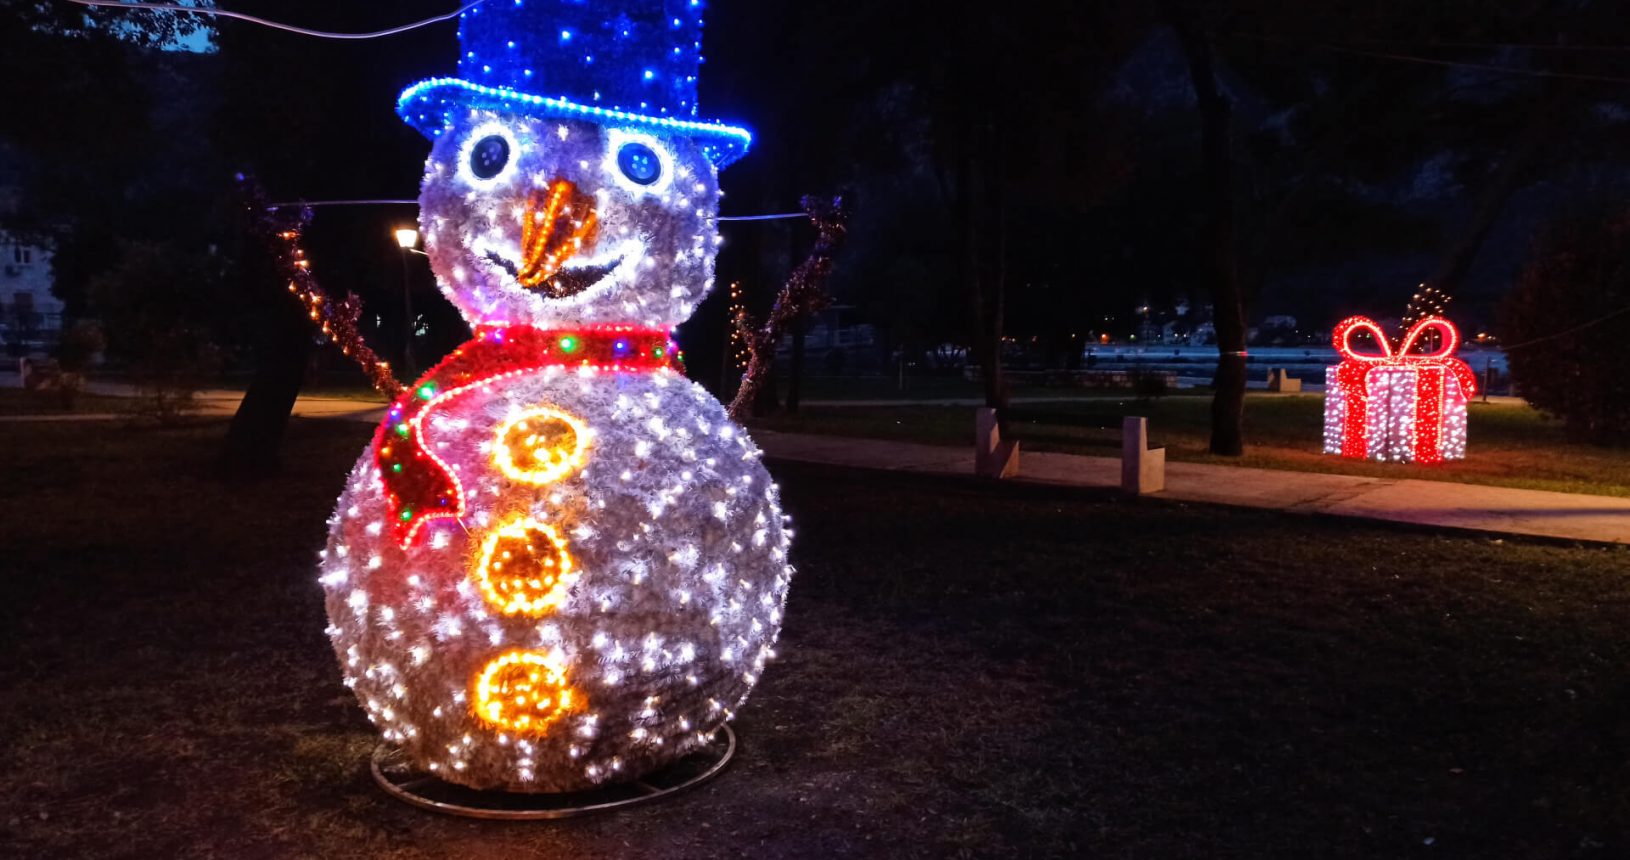 The Snowman in Kotor